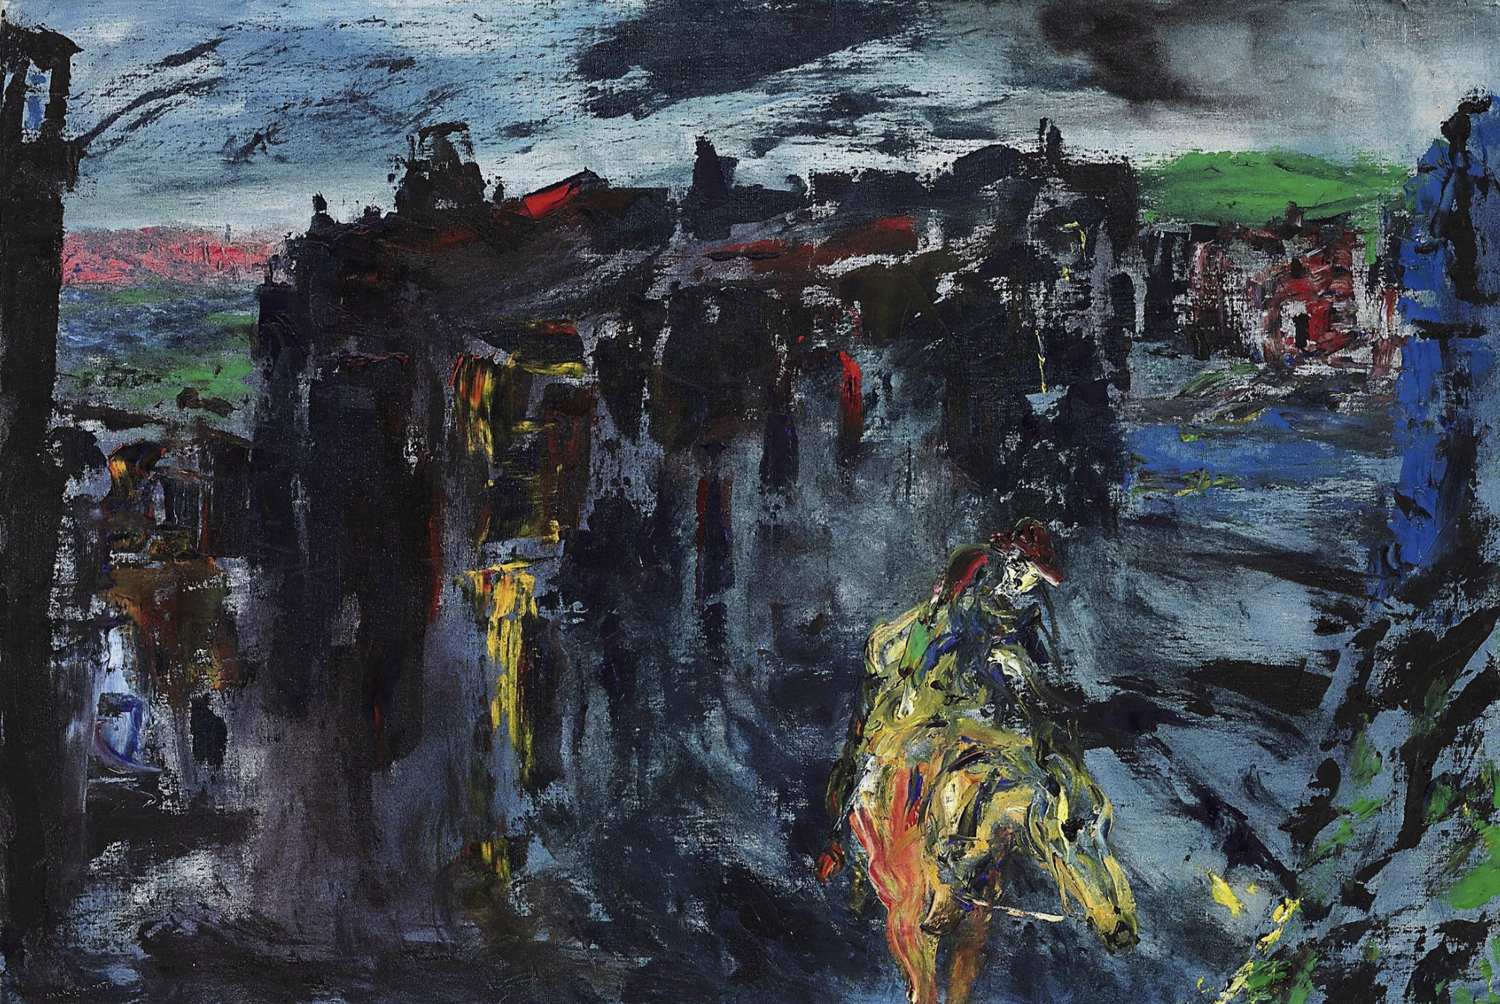 "A horseman enters a town at night", by Jack Butler Yeats